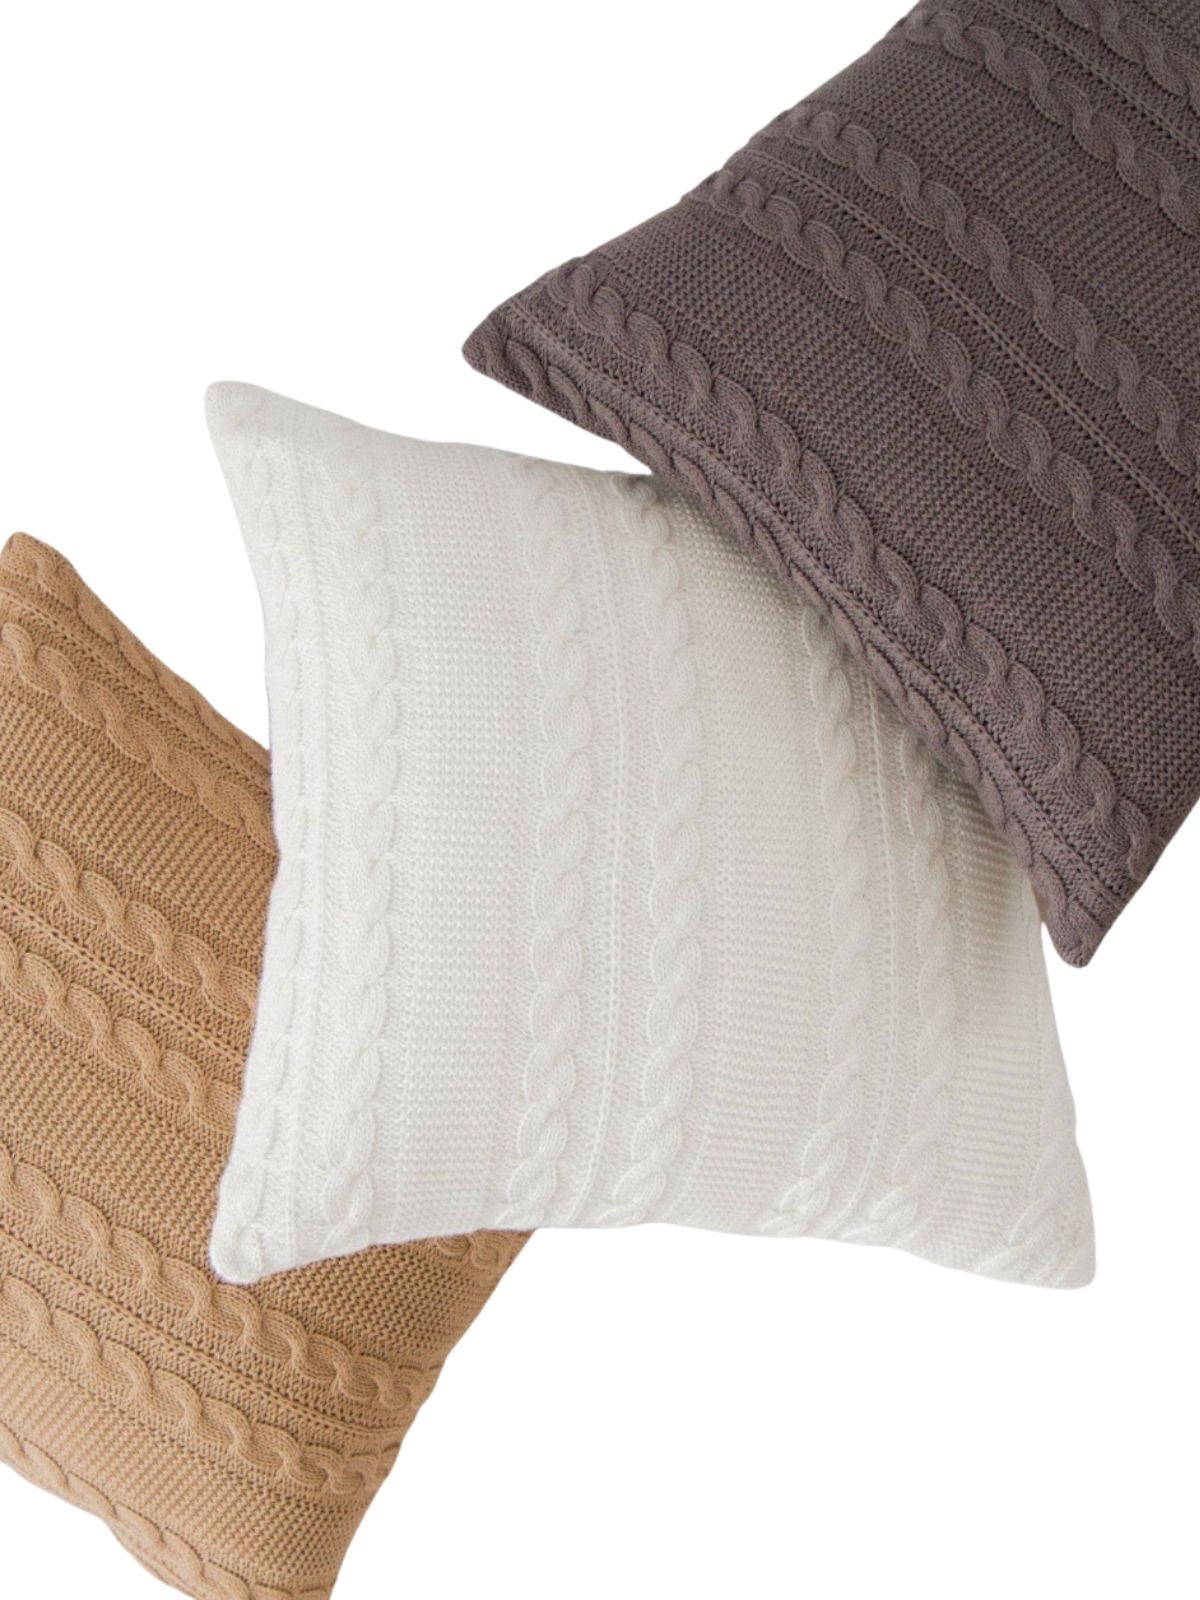 This 100% cotton cable-knit pillow is lightweight for that perfect cozy vibe and yarn-dyed for a lasting rich color. Measuring 18x18 and Available in 3 colors sold by KYA Home Decor 